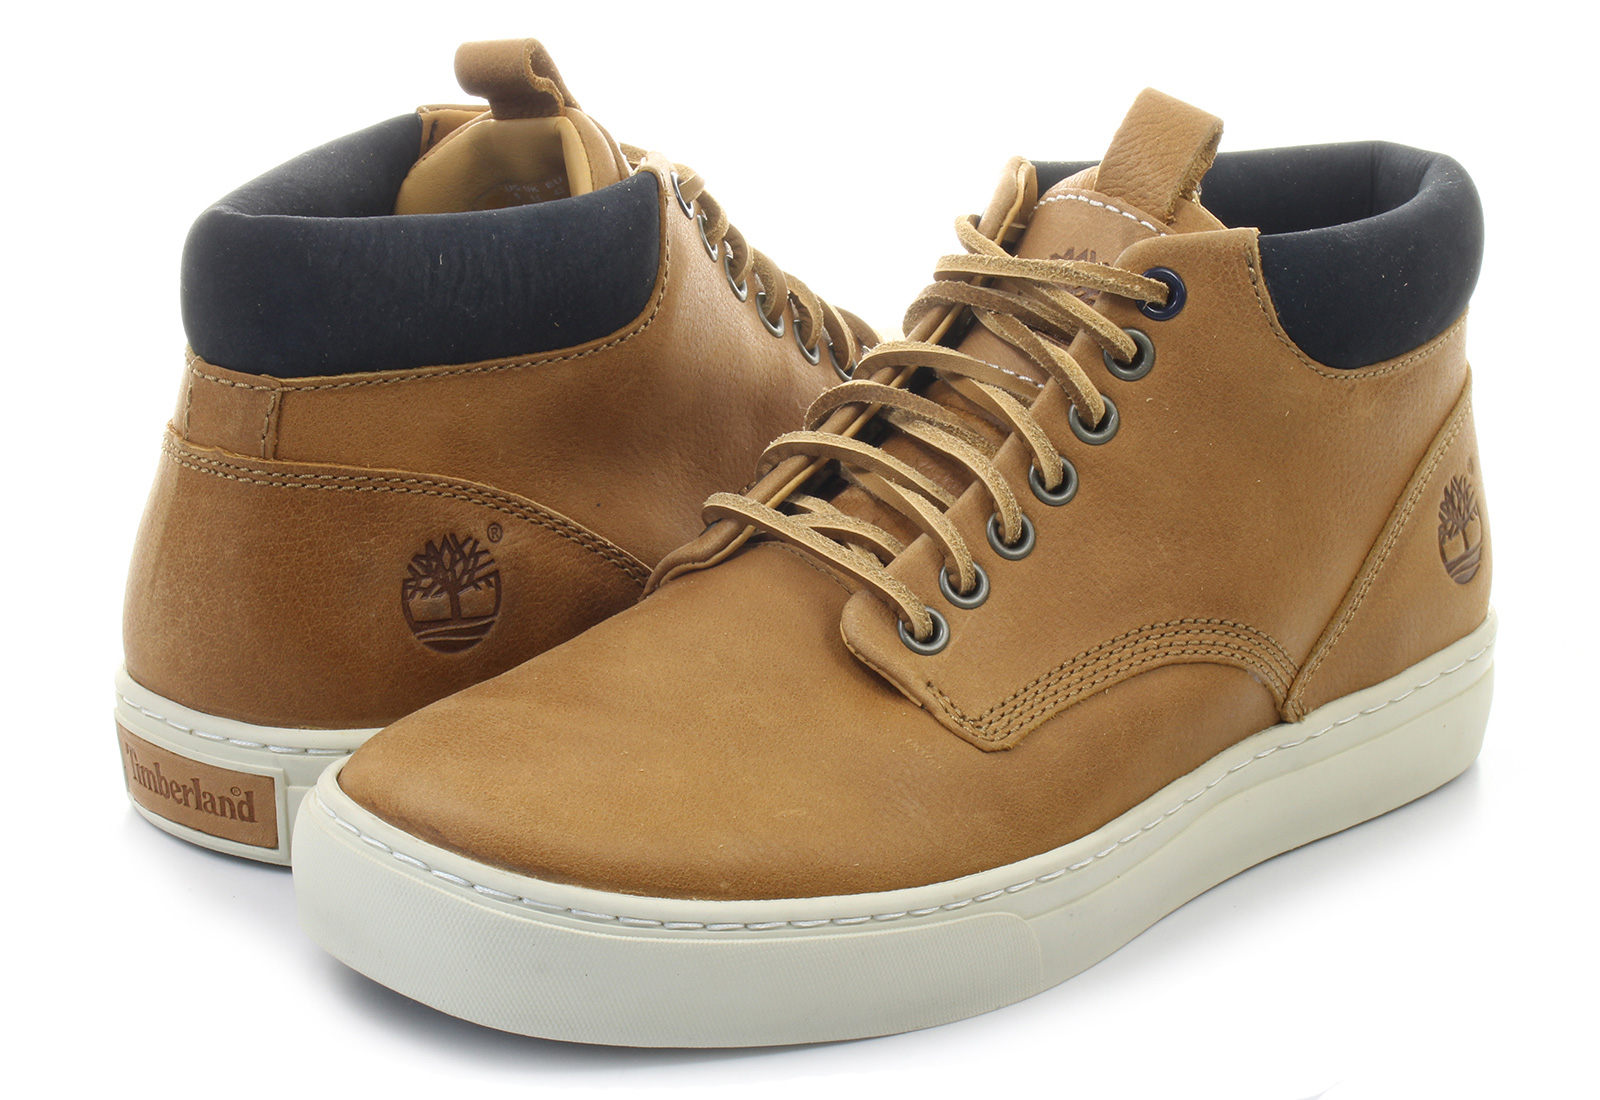 Timberland Shoes - Cupsole Chukka - a12dw-whe - Online shop for ...